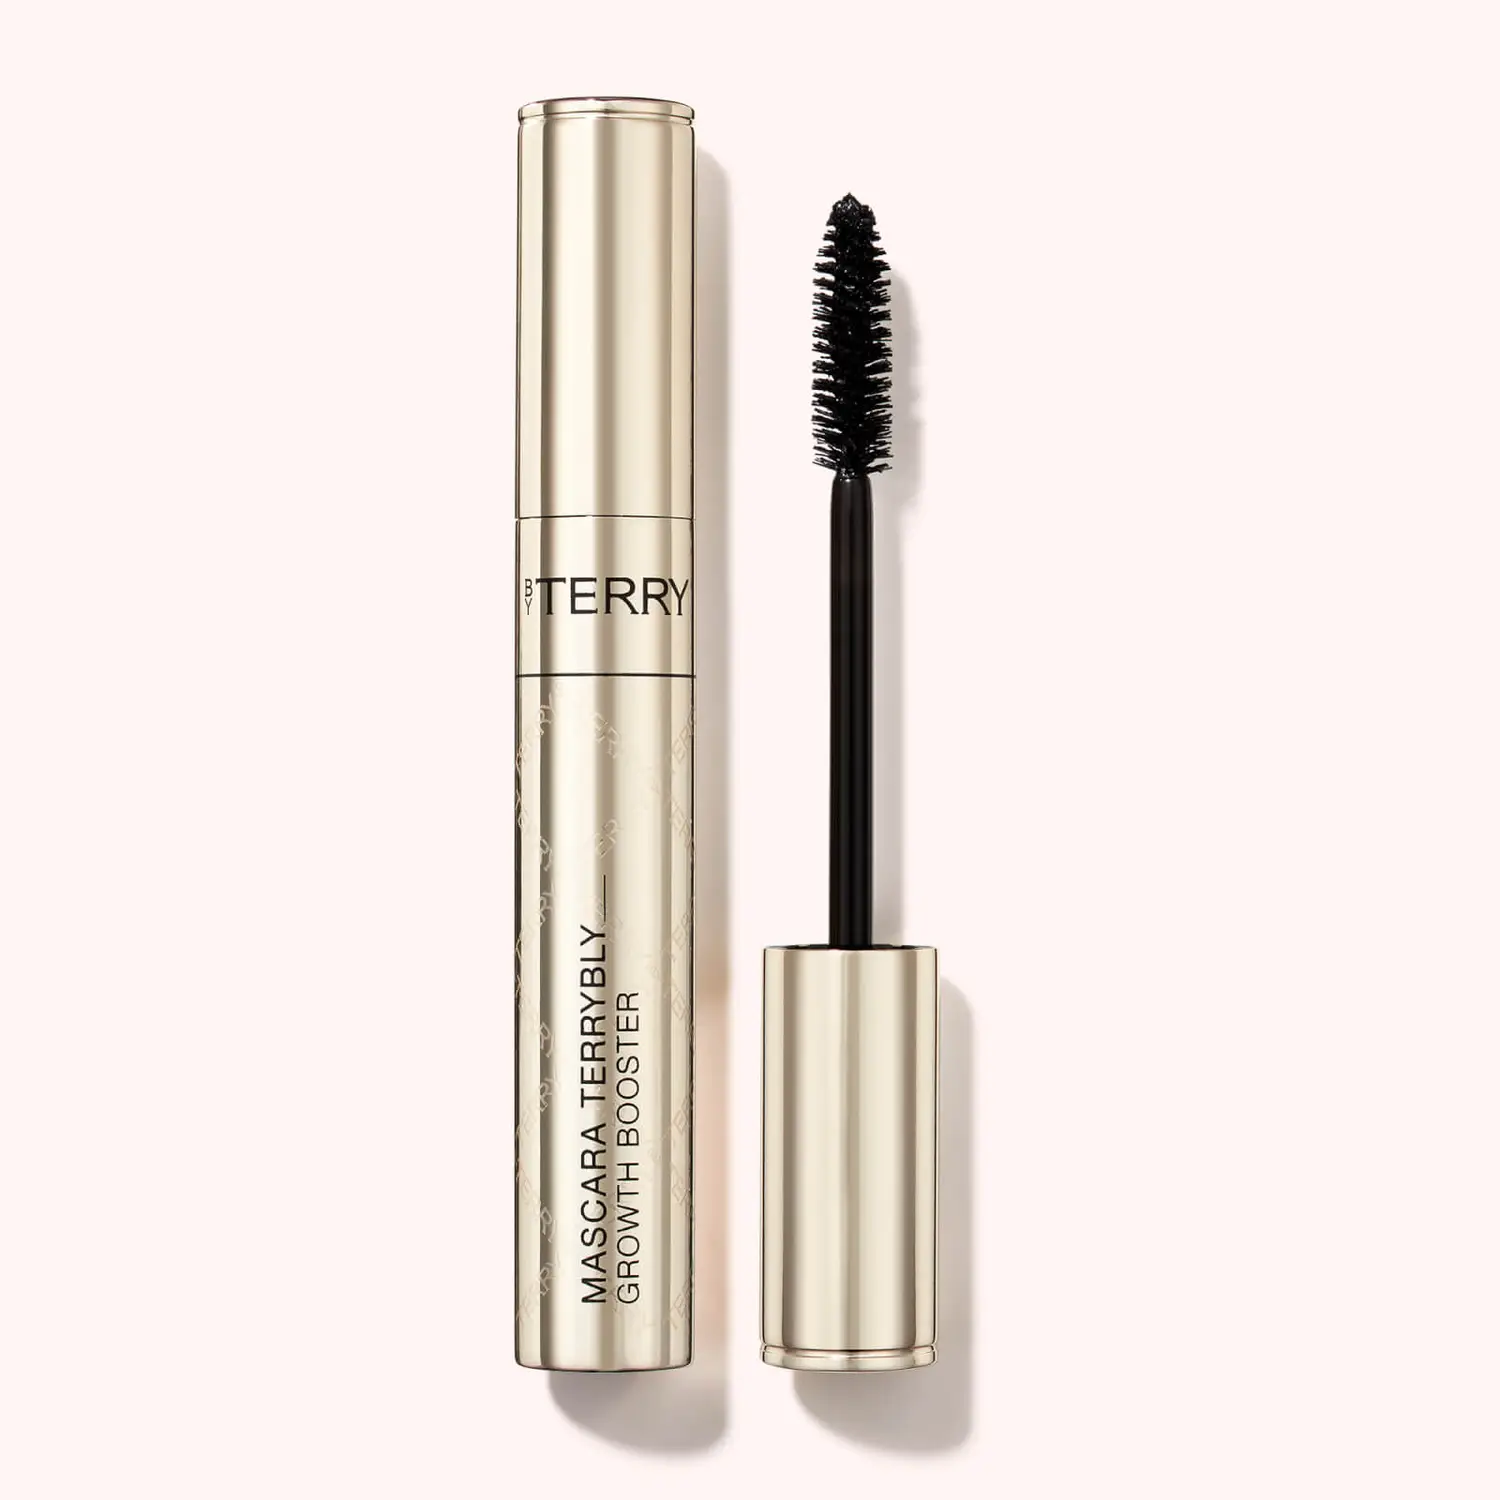 By Terry Terrybly Growth Booster Mascara